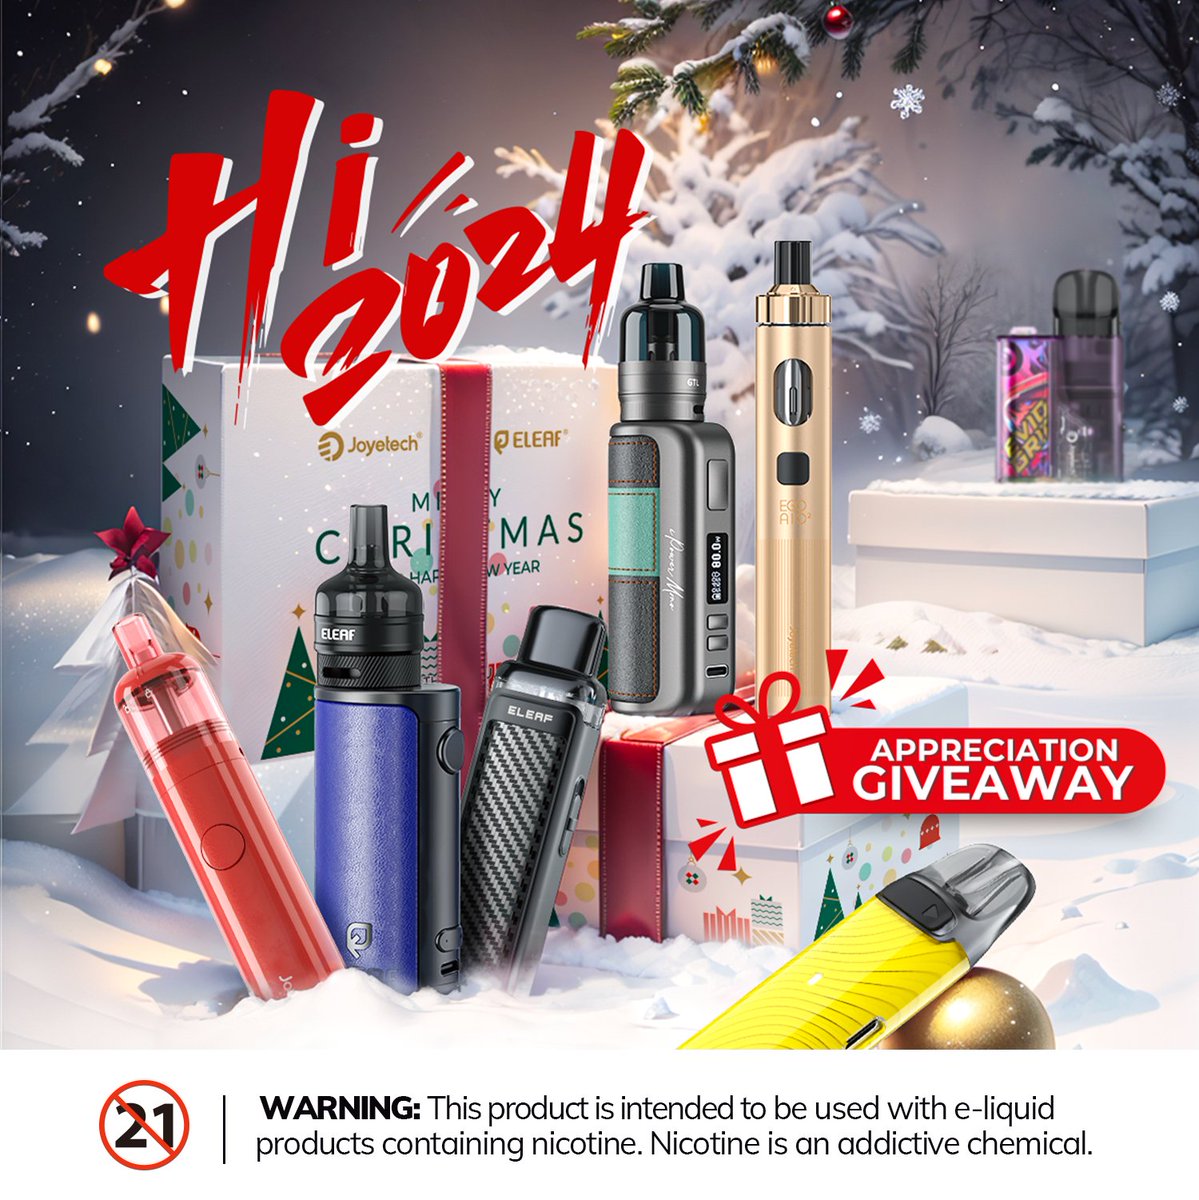 🔔✨Joyetech X Eleaf Fan Appreciation Giveaway🎄🎁

Hi, family! 🌟 As the holiday season approaches, in appreciation of your unwavering support, Joyetech X Eleaf proudly presents a special collaborative giveaway. Exciting prizes await, and we're eager to share the joy with you!